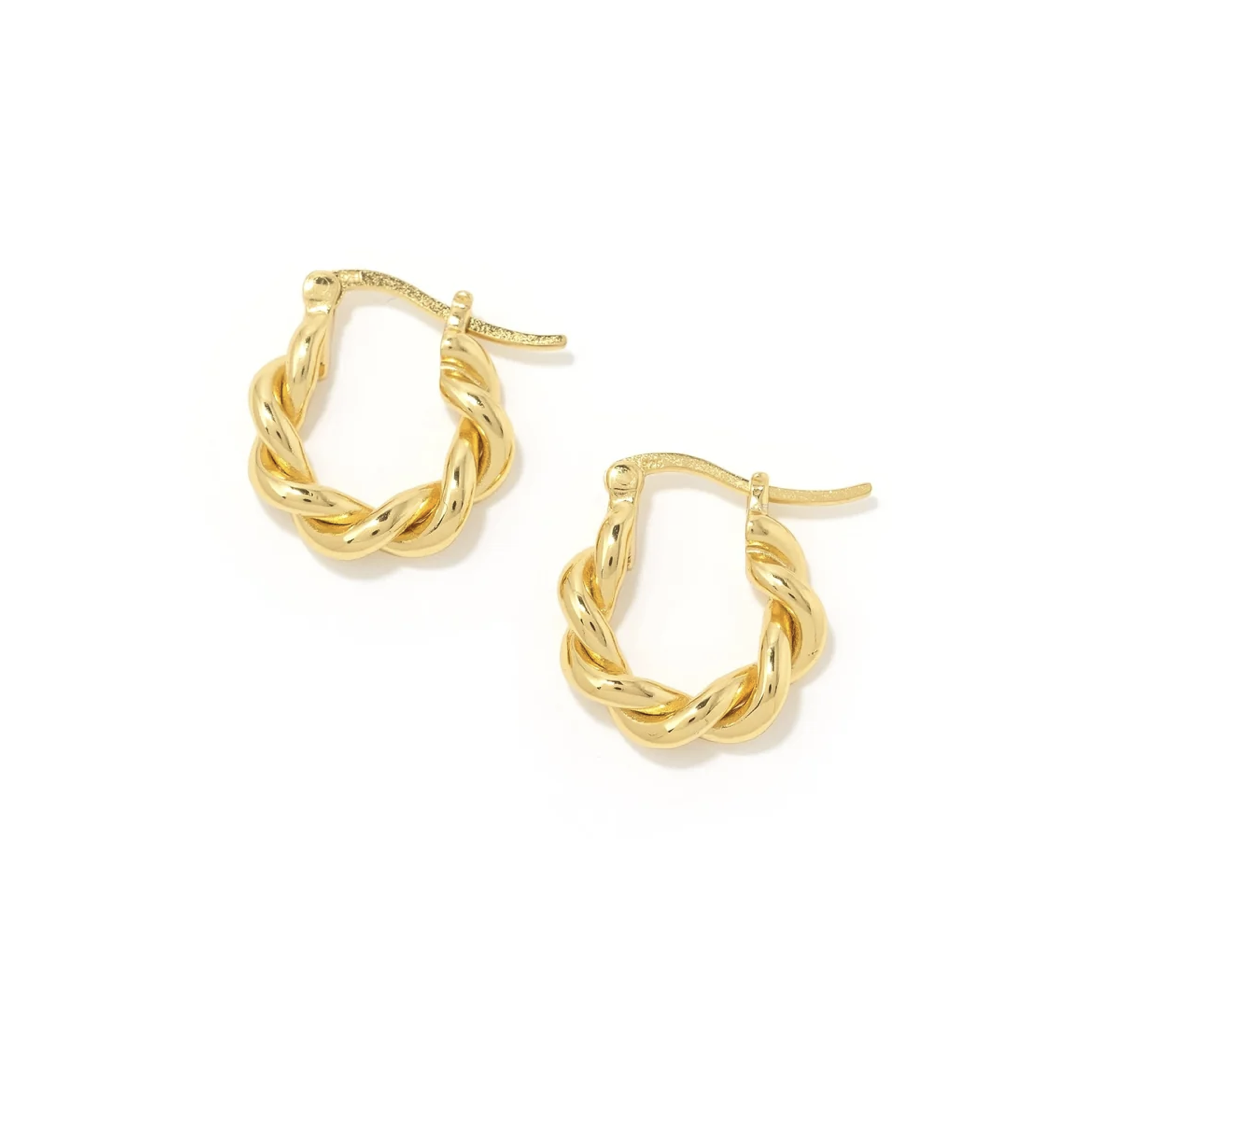 Gold-plated twisted ring earrings